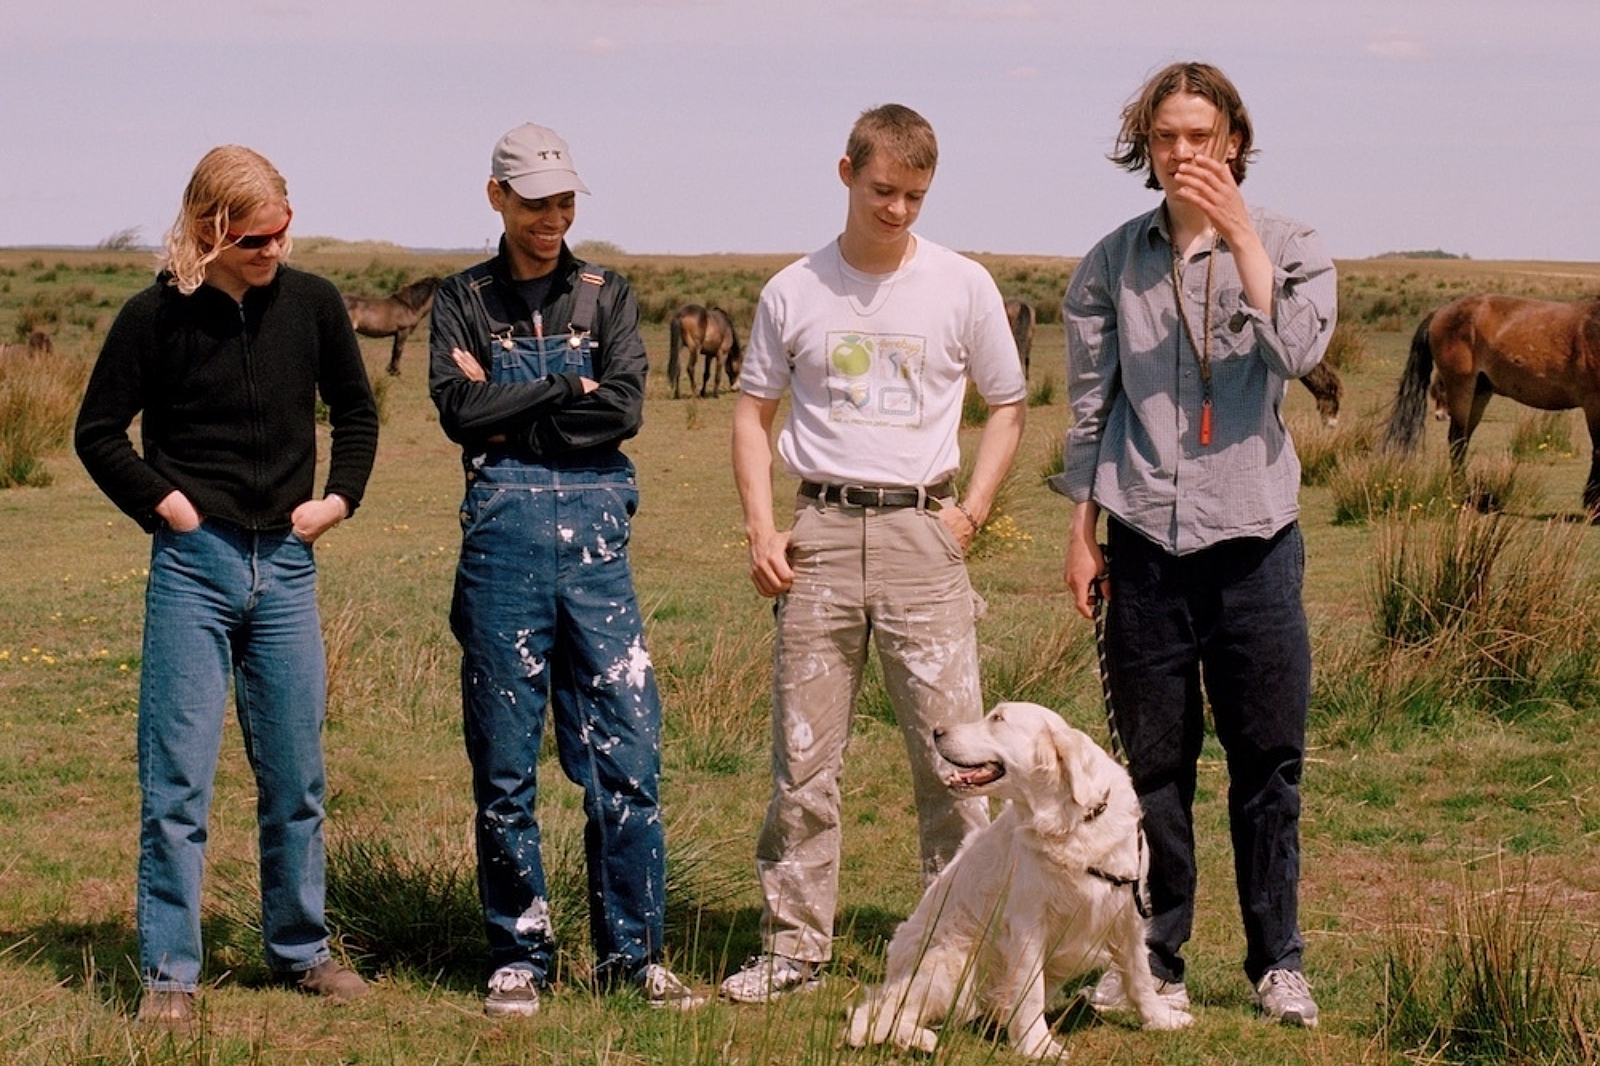 Liss announce debut album 'I Guess Nothing Will Be The Same'